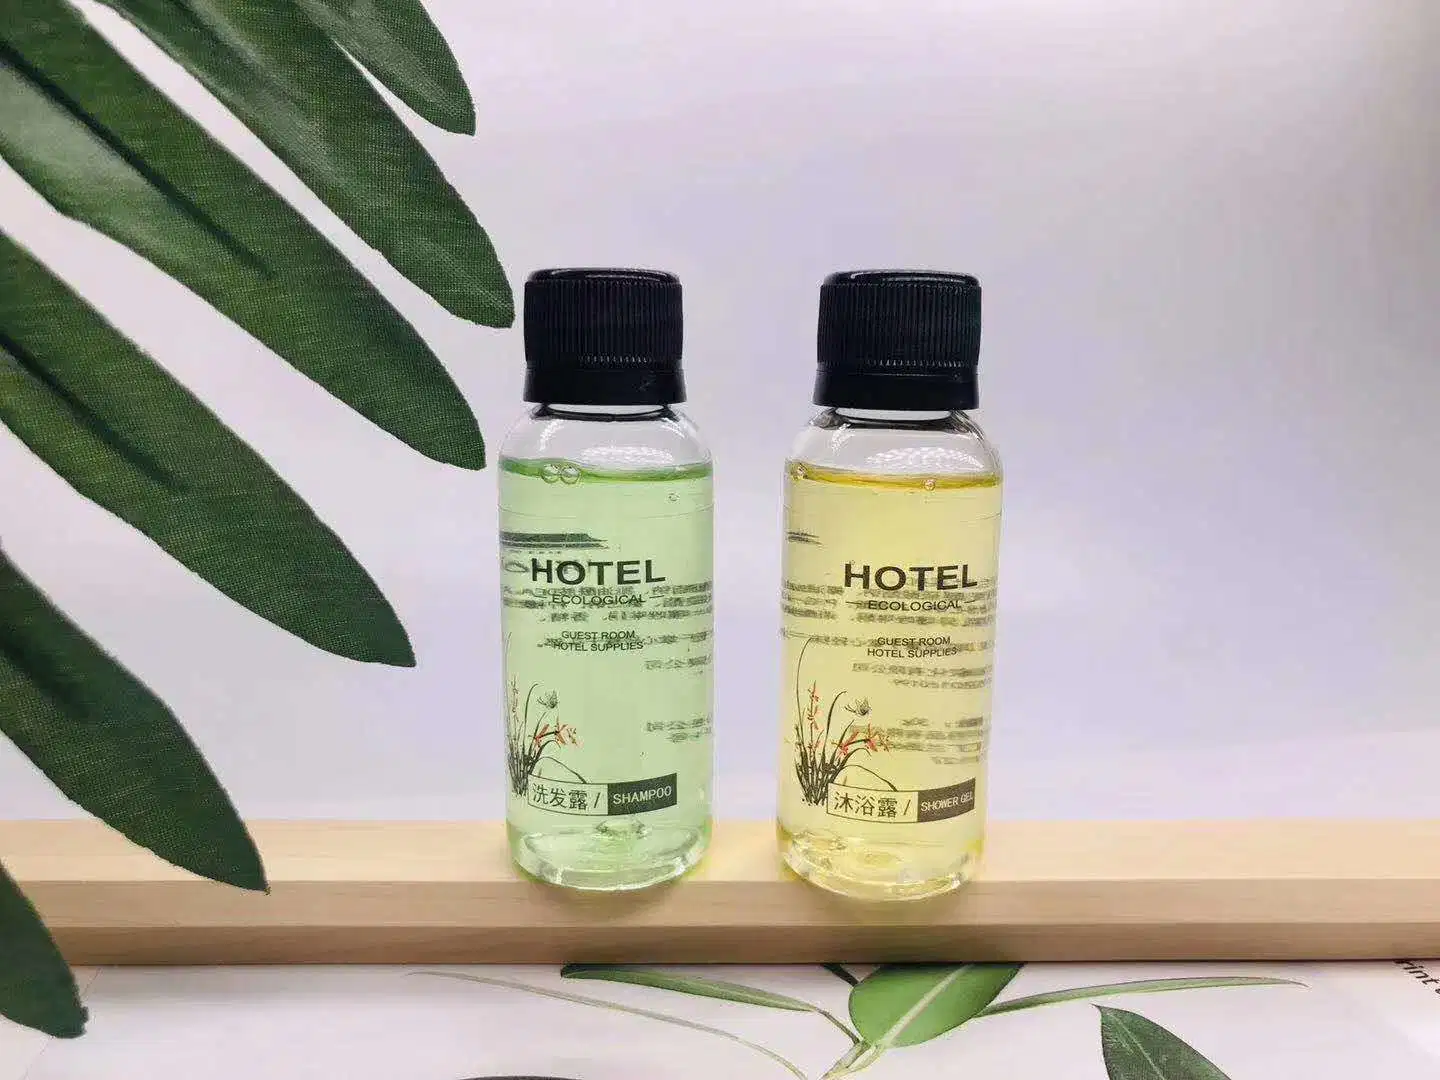 Bath Gel in Pet Bottle with Hotel Amenities for Hotel Room Using